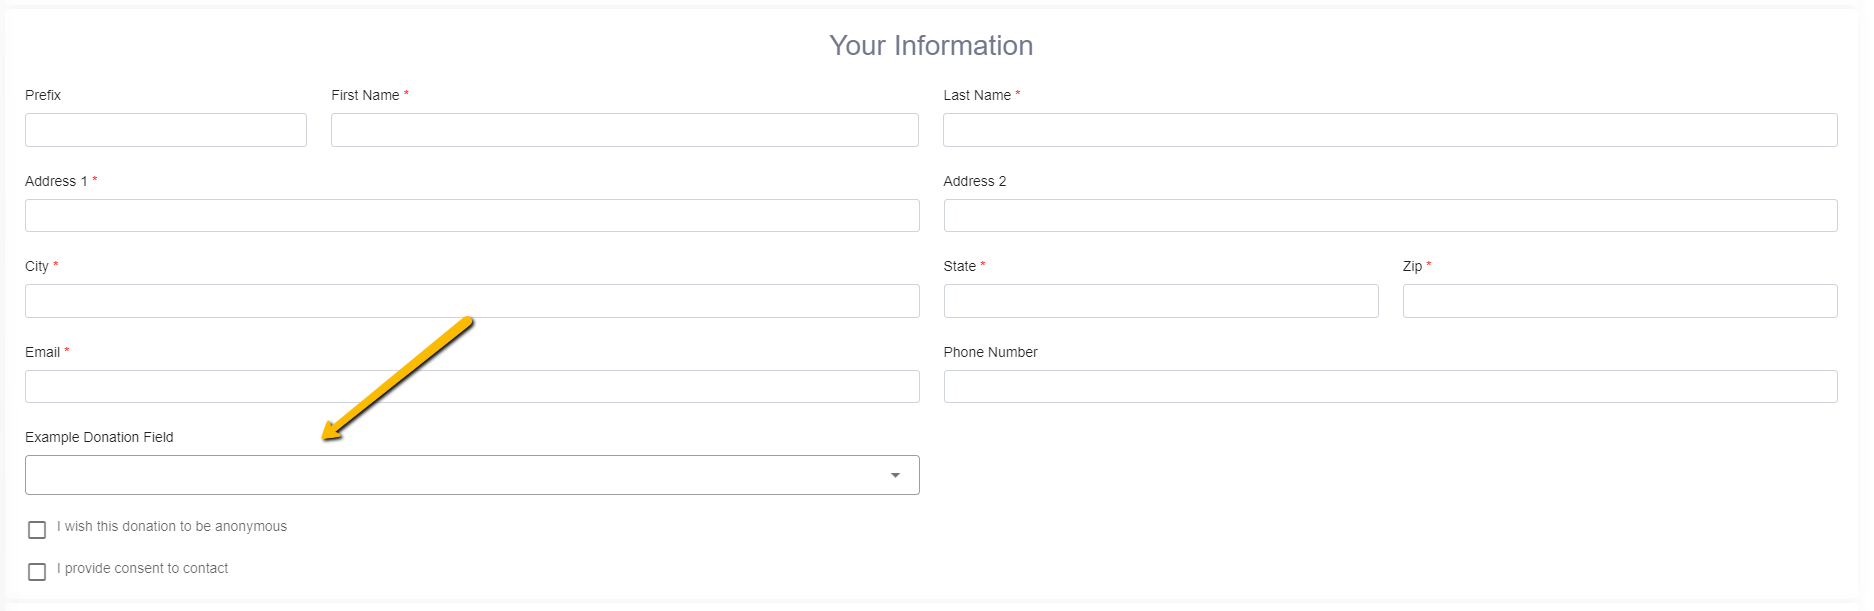 your information section with an example custom field beneath it